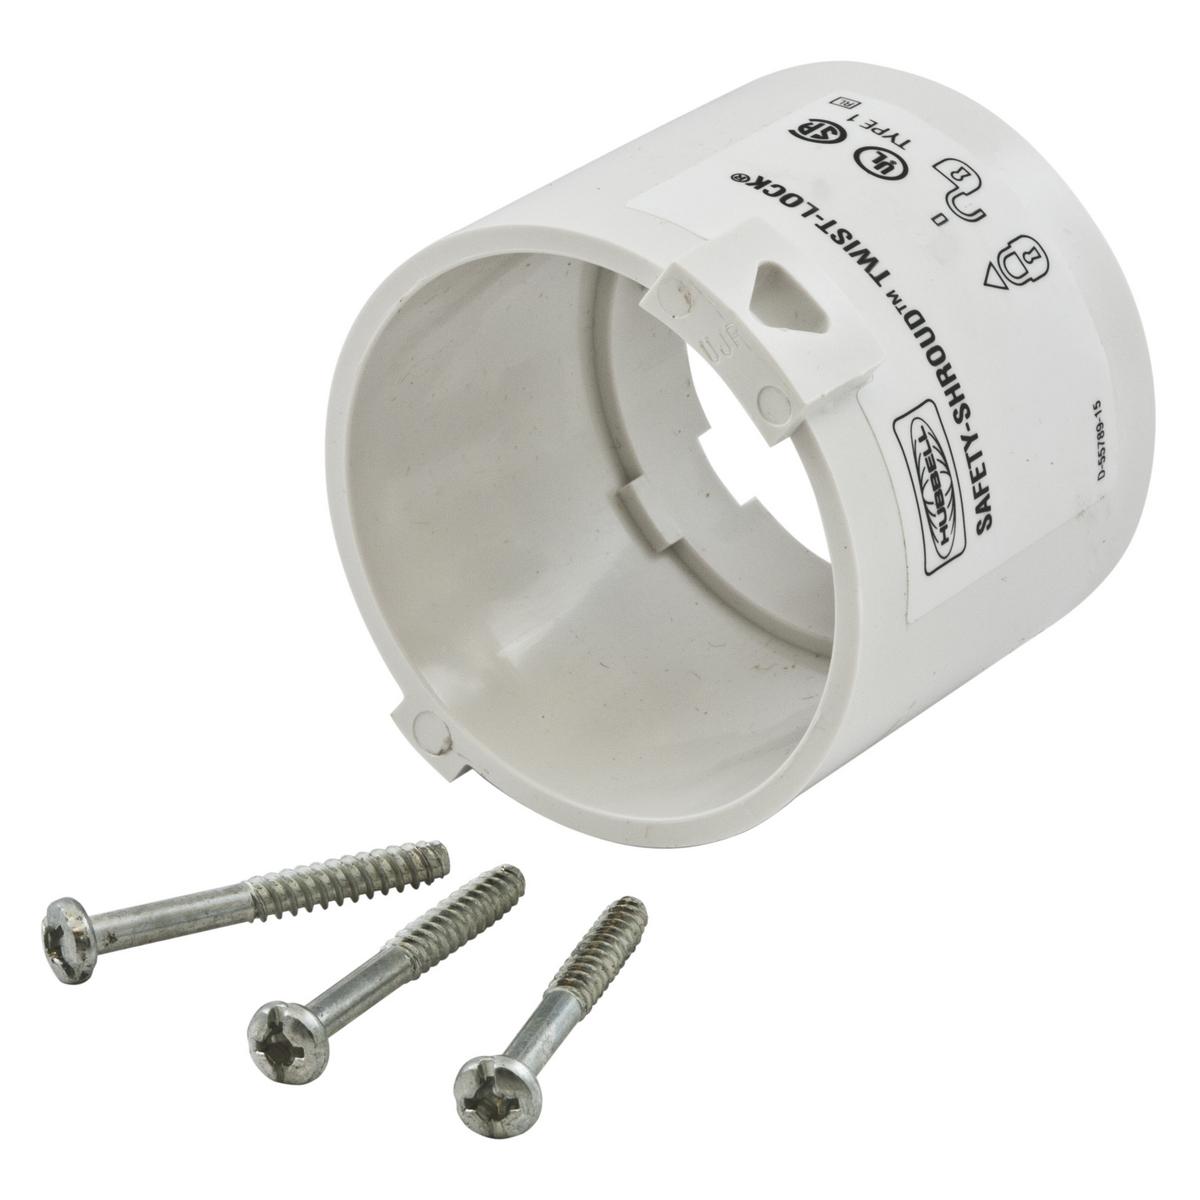 Hubbell HBLSS3 Locking Devices, Twist-Lock®, Safety-Shroud®, Shroud Kit for Plugs, 20A and 30A 3-Wire, White  ; Add-A-Shroud® devices allow conversion of existing 20A and 30A 3 to 5 wire Hubbell Insulgrip® Twist-Lock® devices to a Safety-Shroud® Twist-Lock® plug ; The S